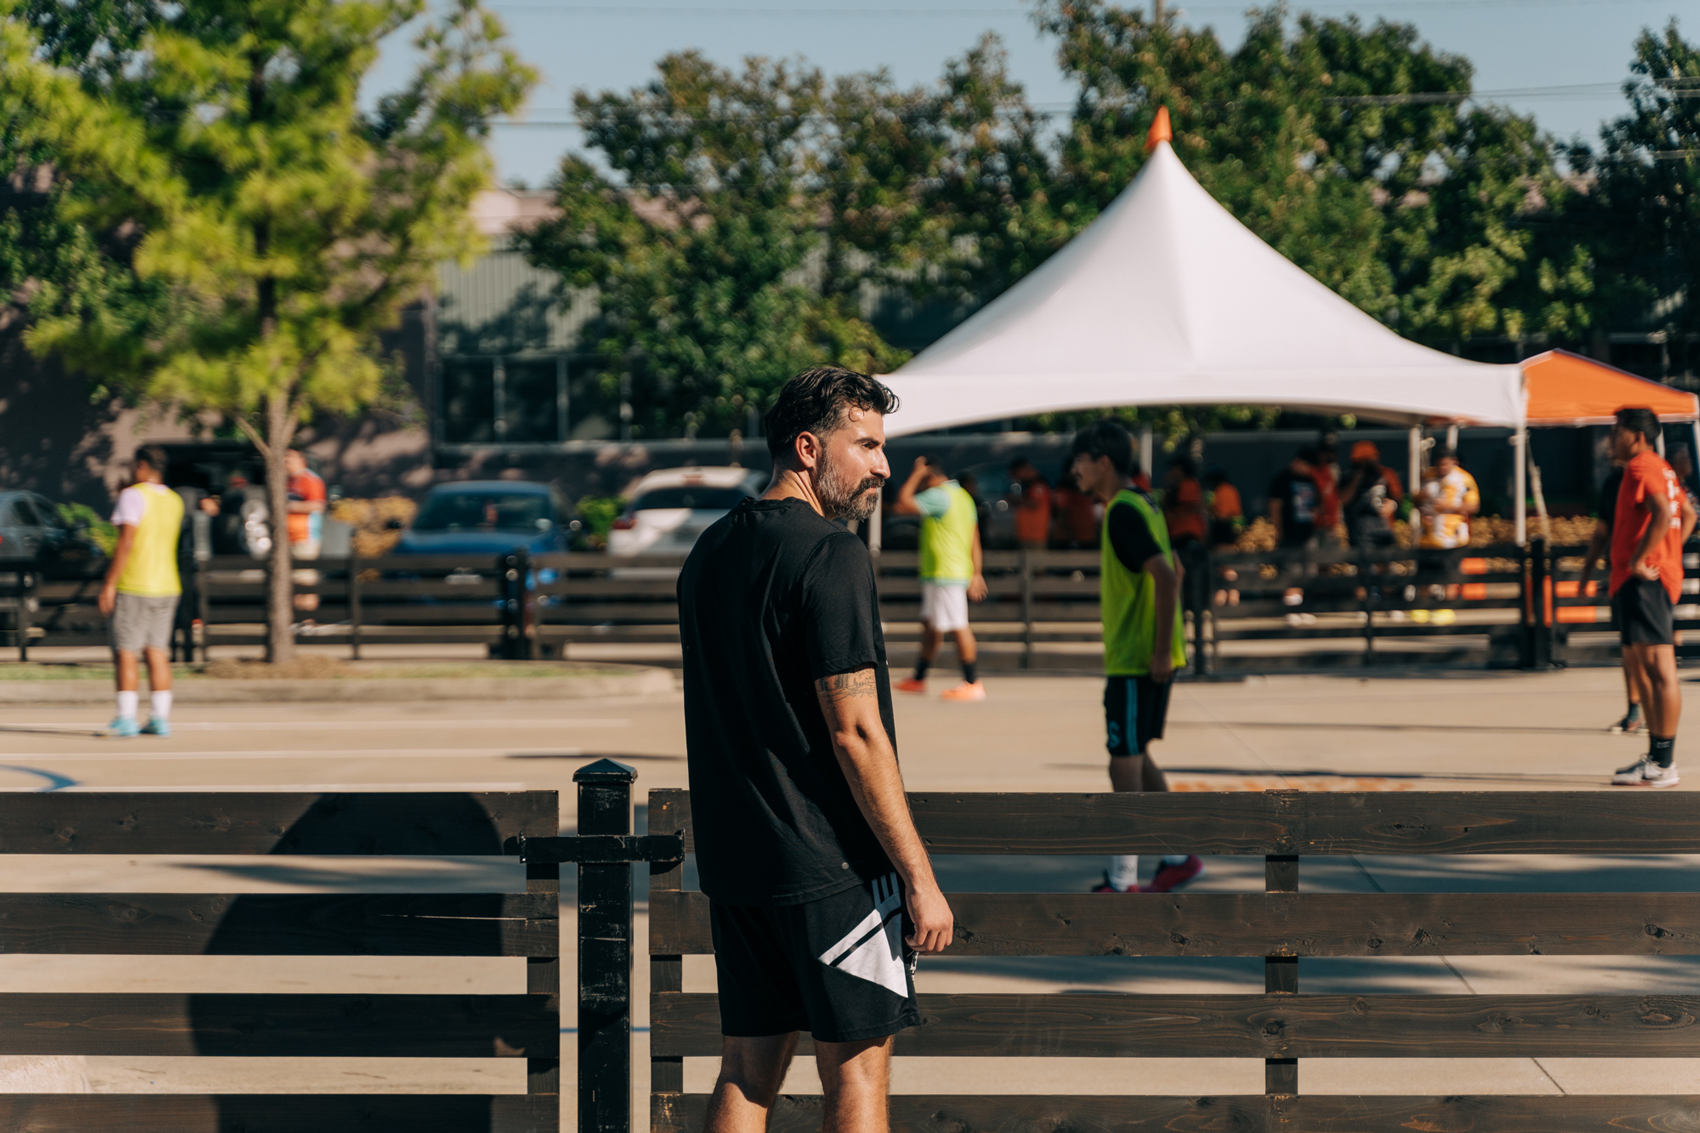 Juan Vega, a Houstonian who had to quit his job with the Dynamo because his status changed through the DACA program, walks across the soccer field on Saturday, Sept. 30, 2023, in Houston.